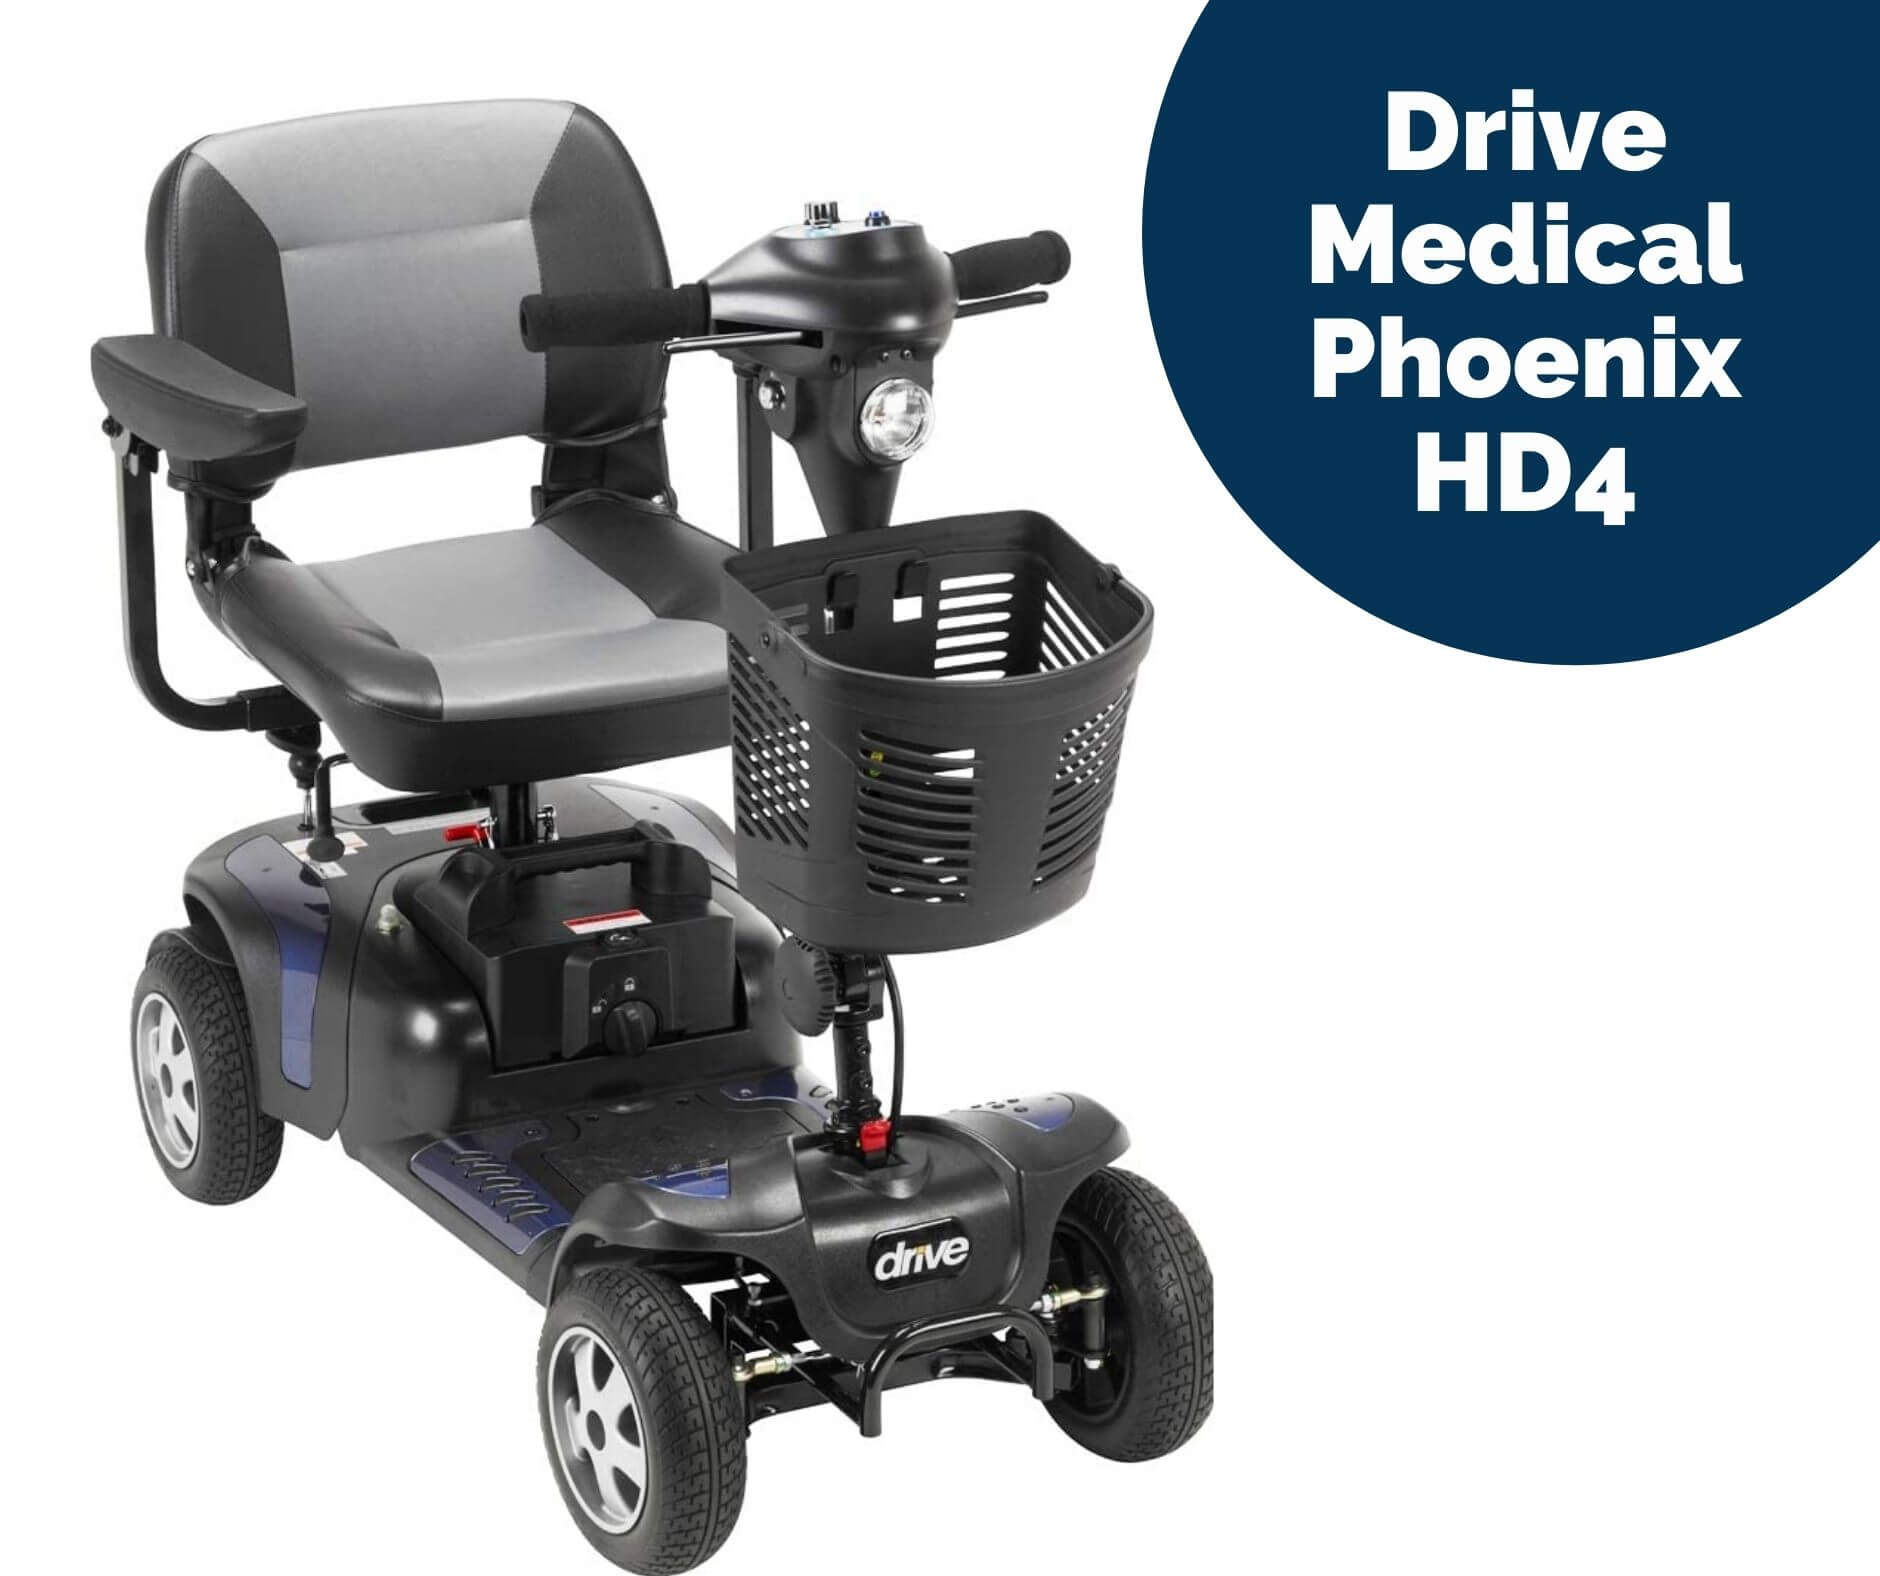 Drive Medical Phoenix HD4 Heavy-Duty Electric Mobility Scooter